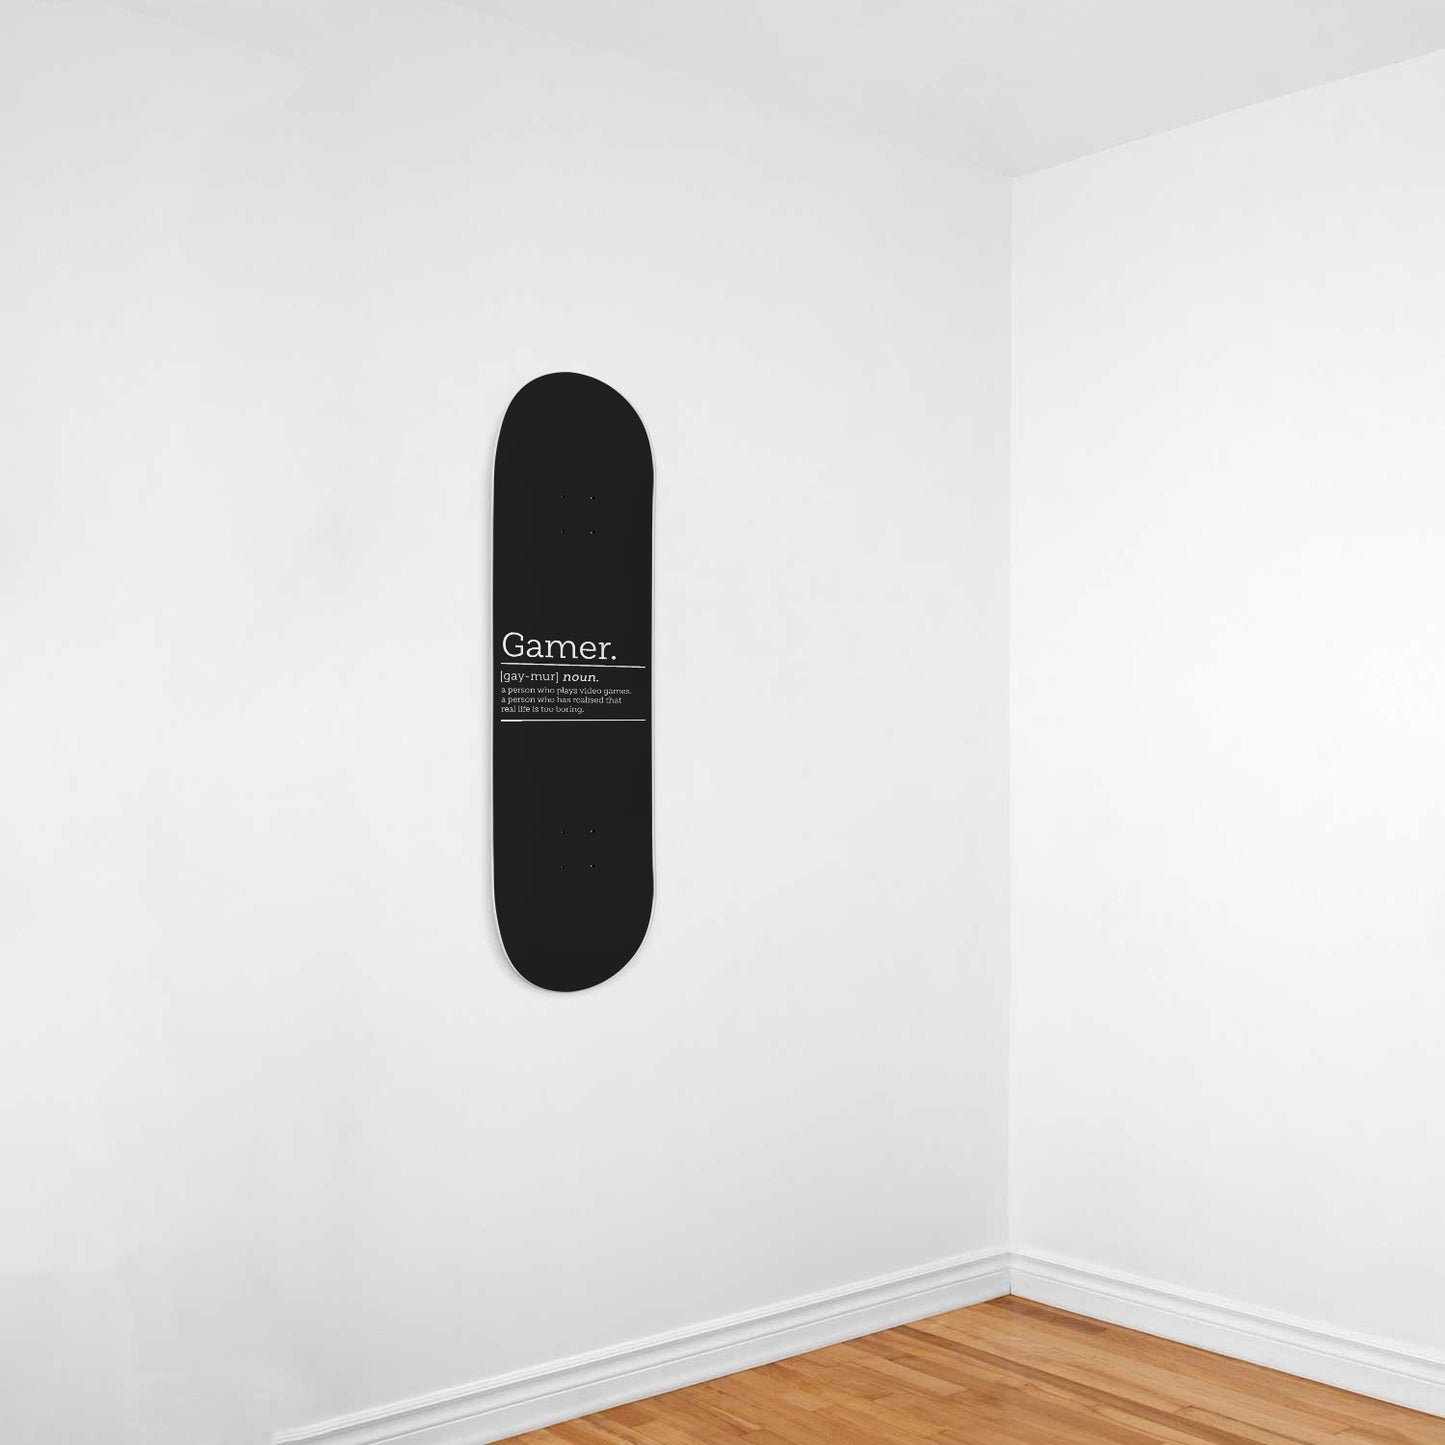 Gamer Dictionary Quote | Gamer Definition Black Skateboard Wall Art,